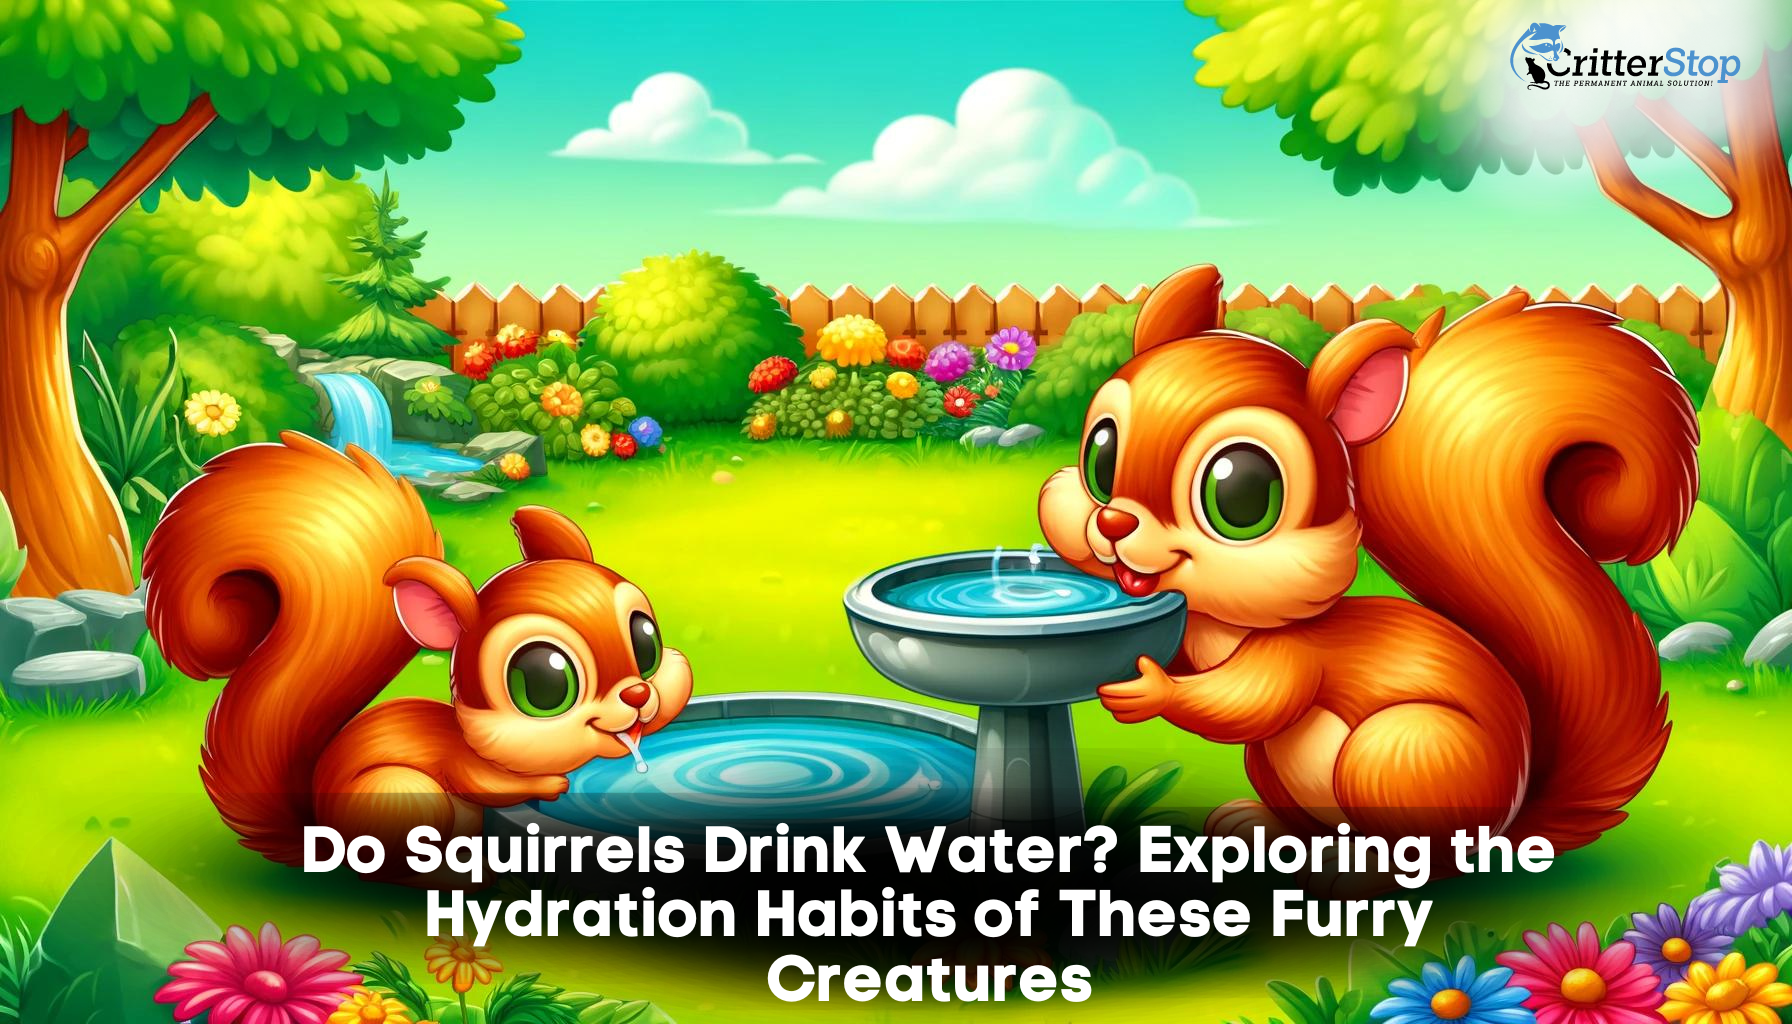 do squirrels drink water, water for squirrels, do squirrels need water, where do squirrels find water